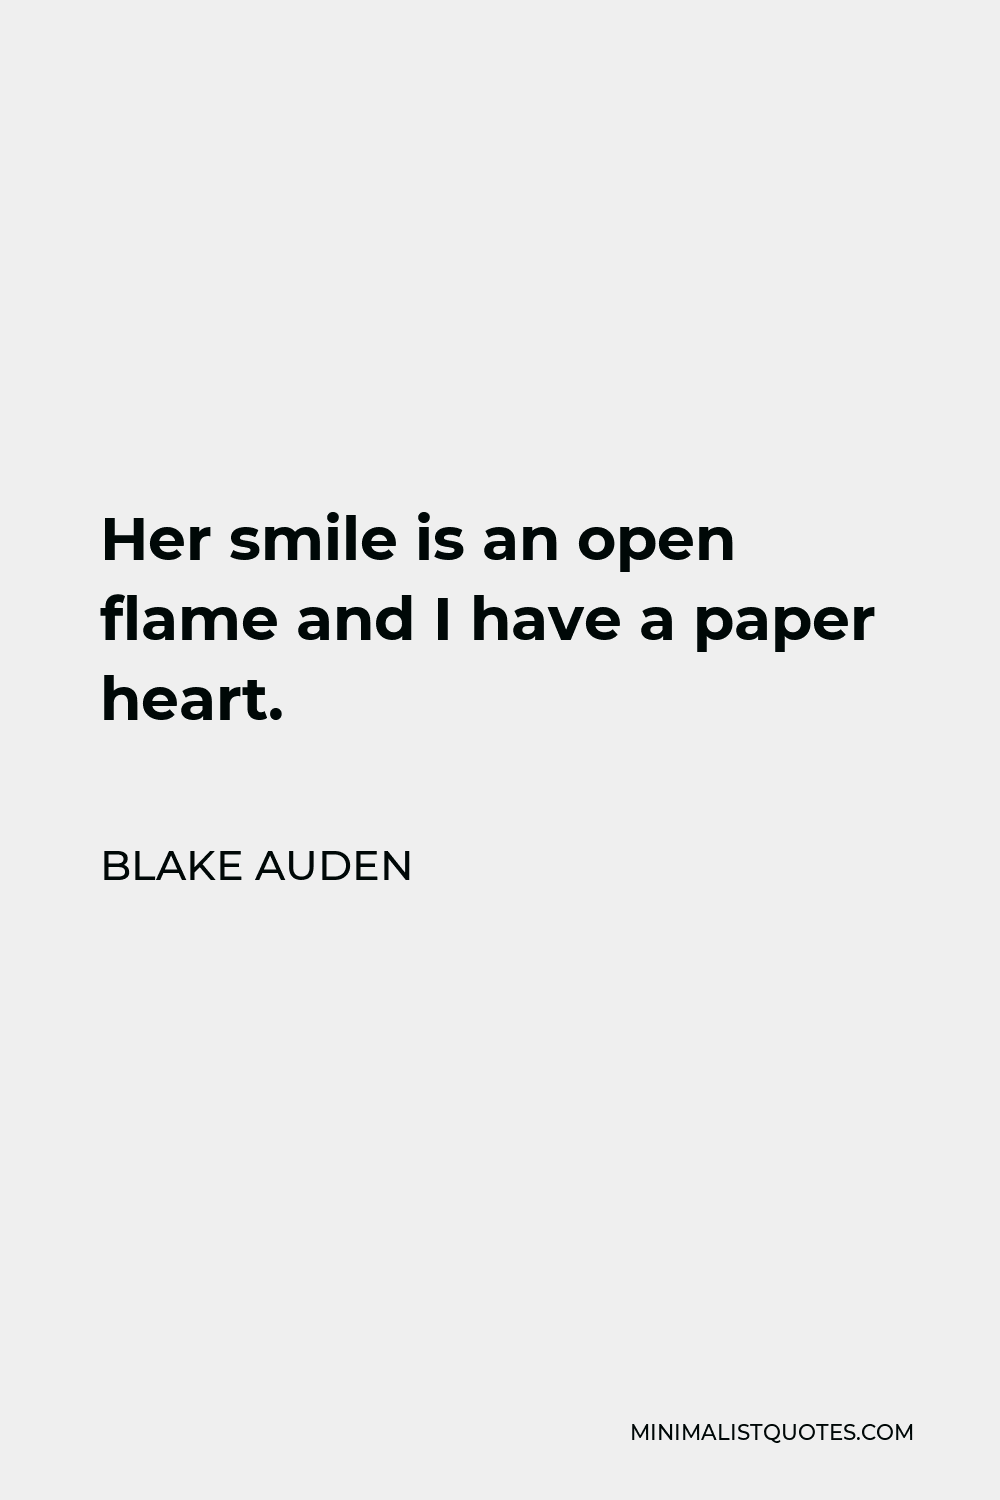 Blake Auden Quote - Her smile is an open flame and I have a paper heart.